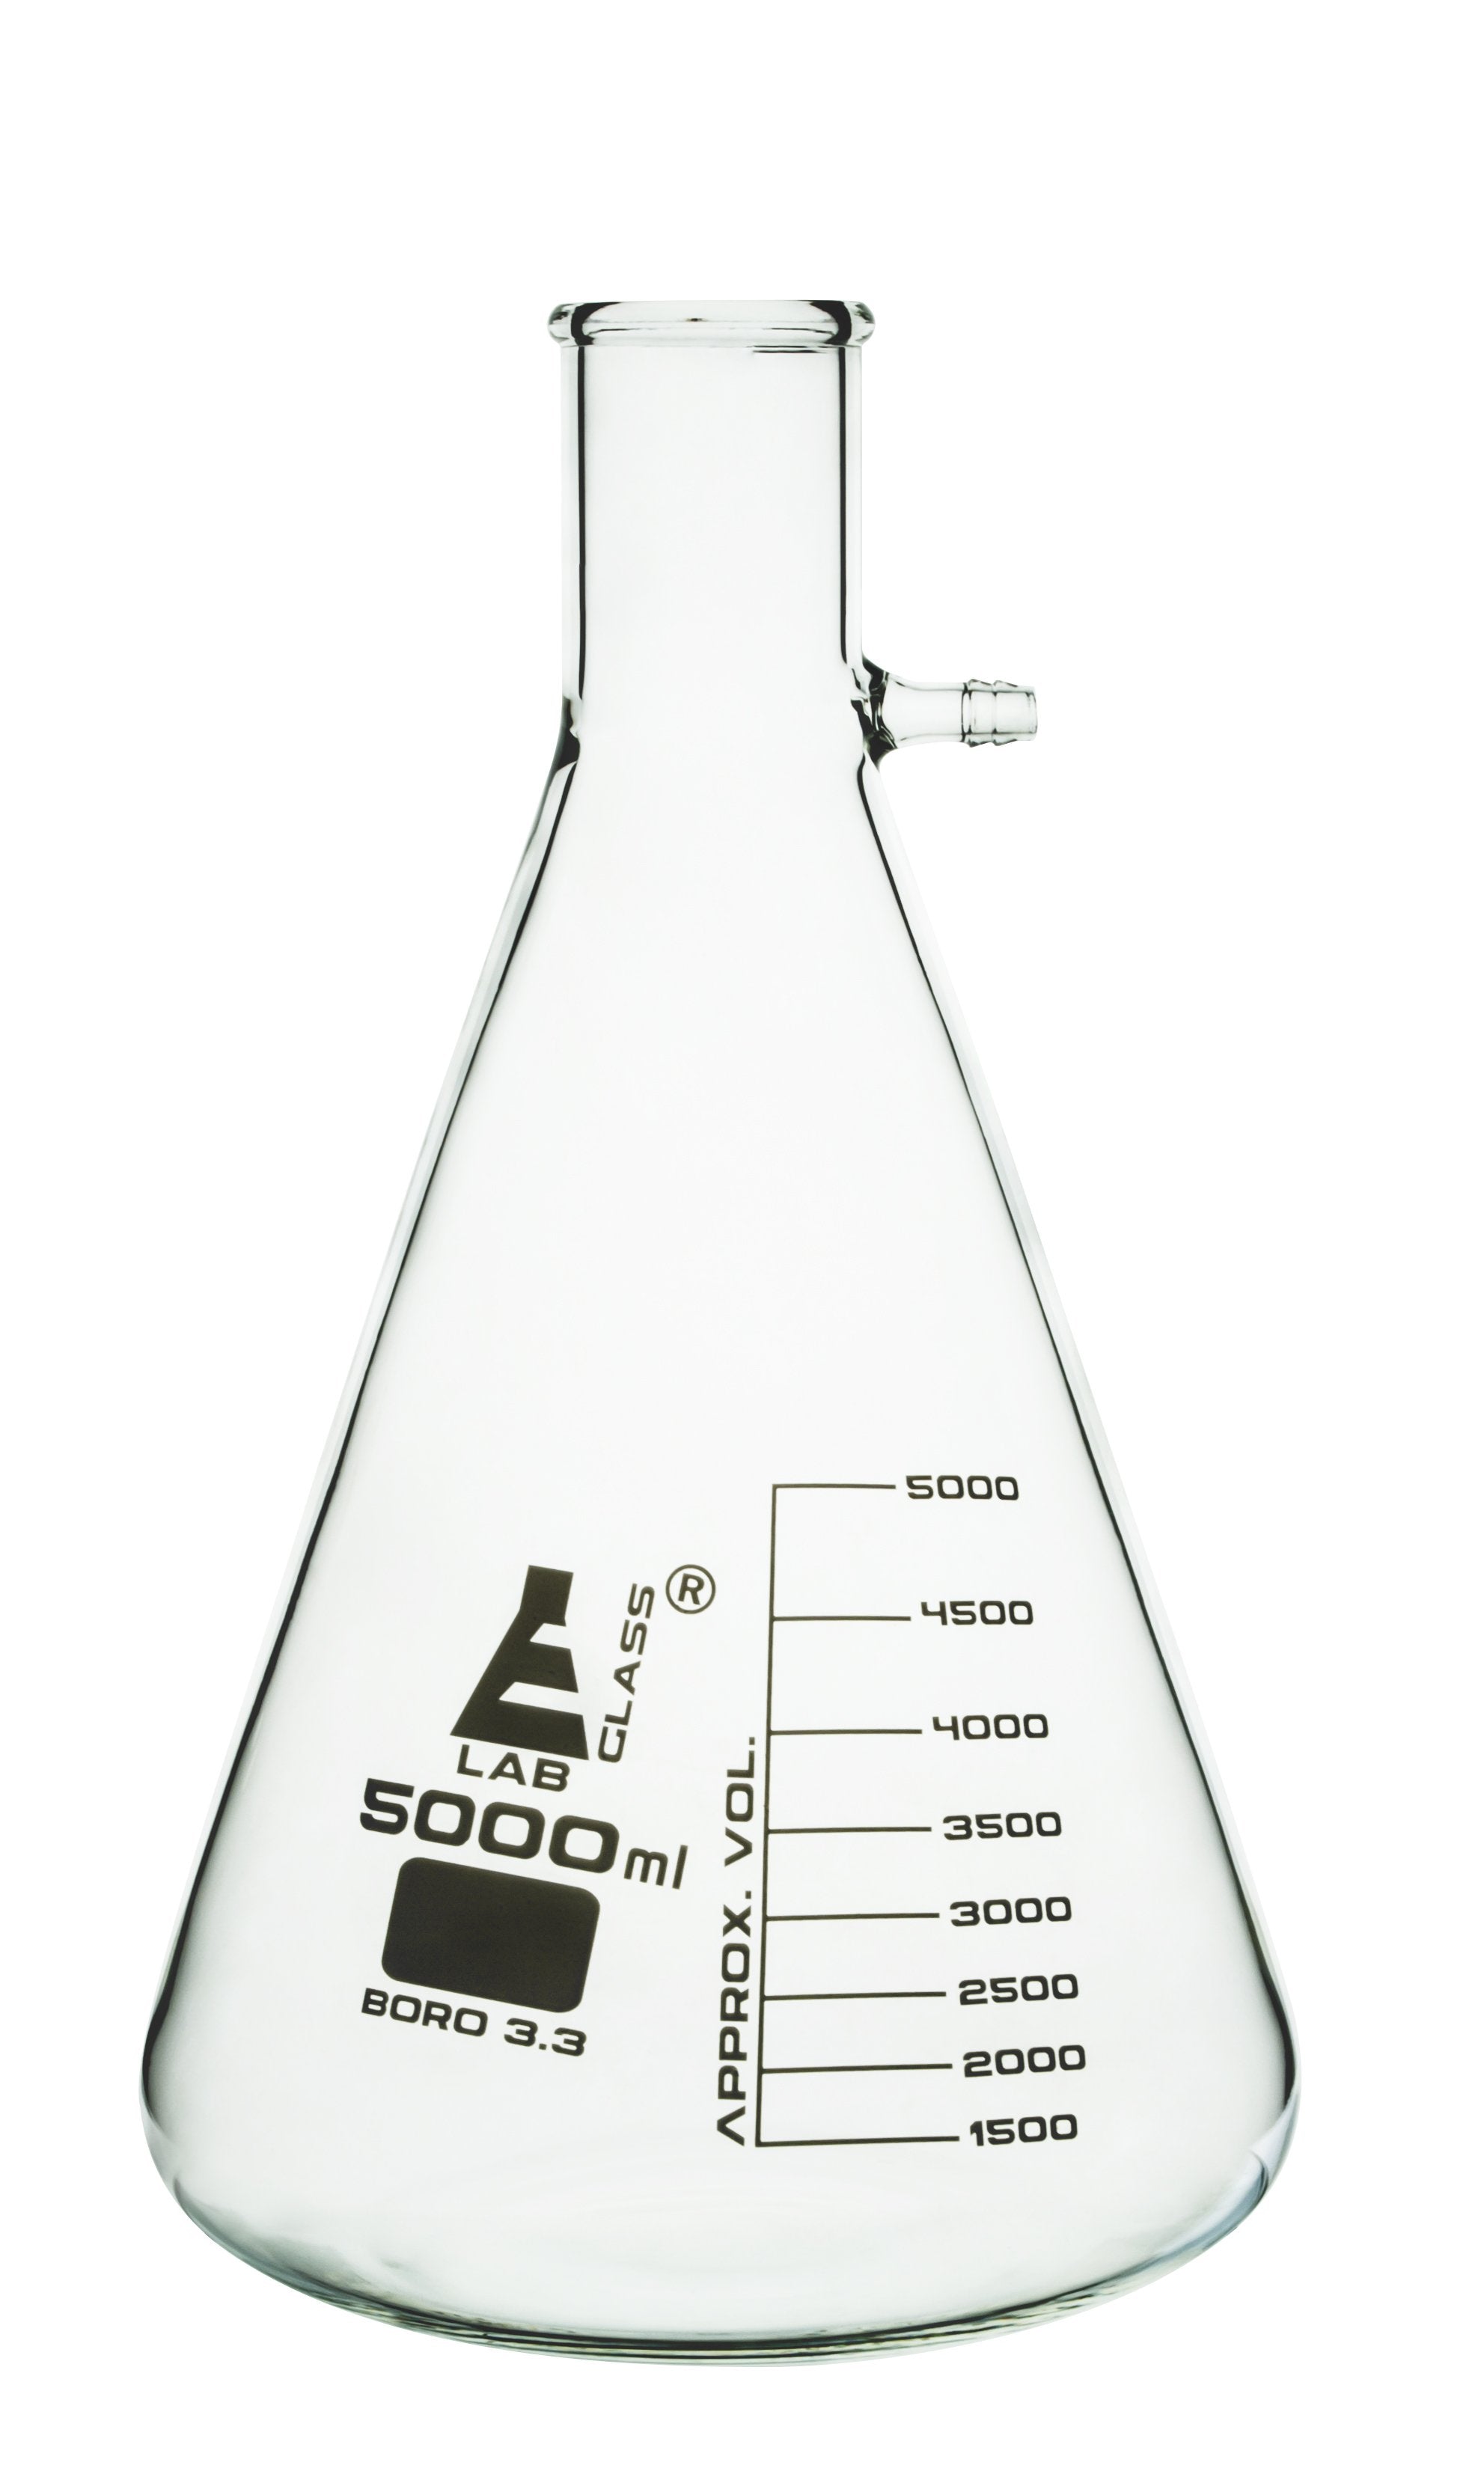 Borosilicate Glass Filtering Flask With Glass Connector, 5000ml, Graduated, Autoclavable